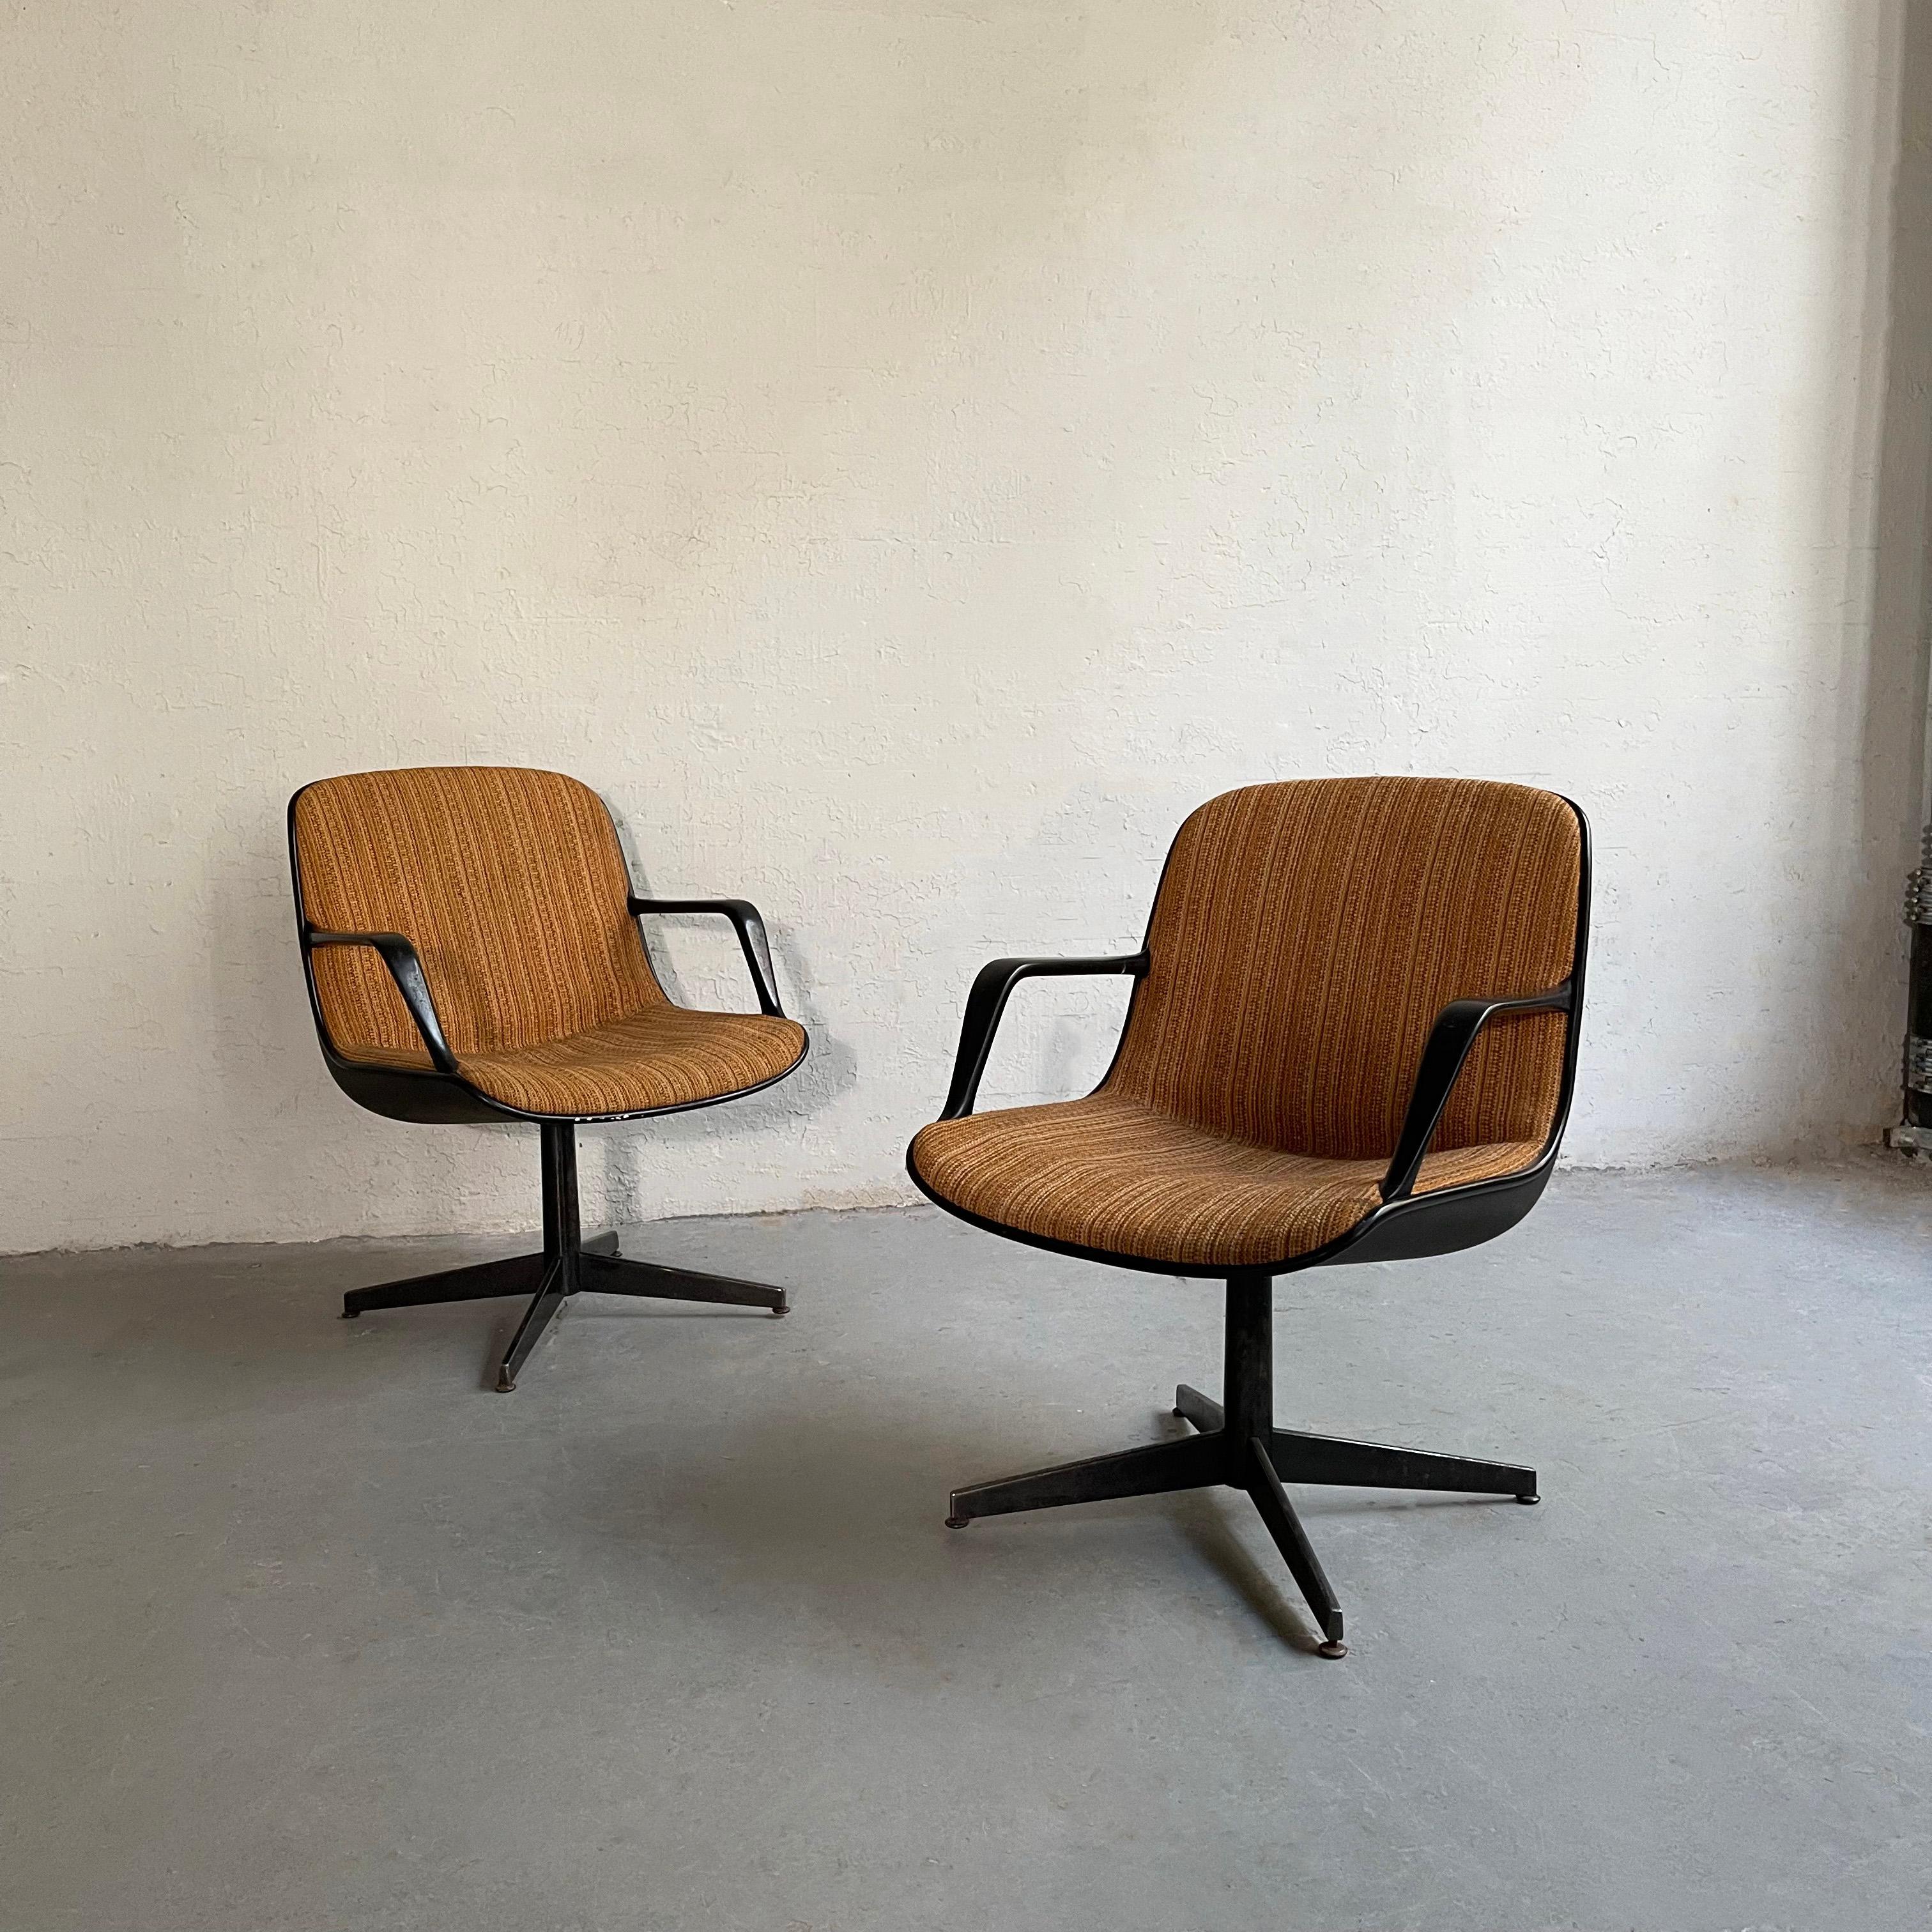 Pair of Steelcase armchairs, model #451 feature plastic shells, metal arms and 4 prong pedestal bases with striped fabric upholstery. The chairs are similar in style to the Charles Pollack, Knoll chair. Classic midcentury style with comfort, great